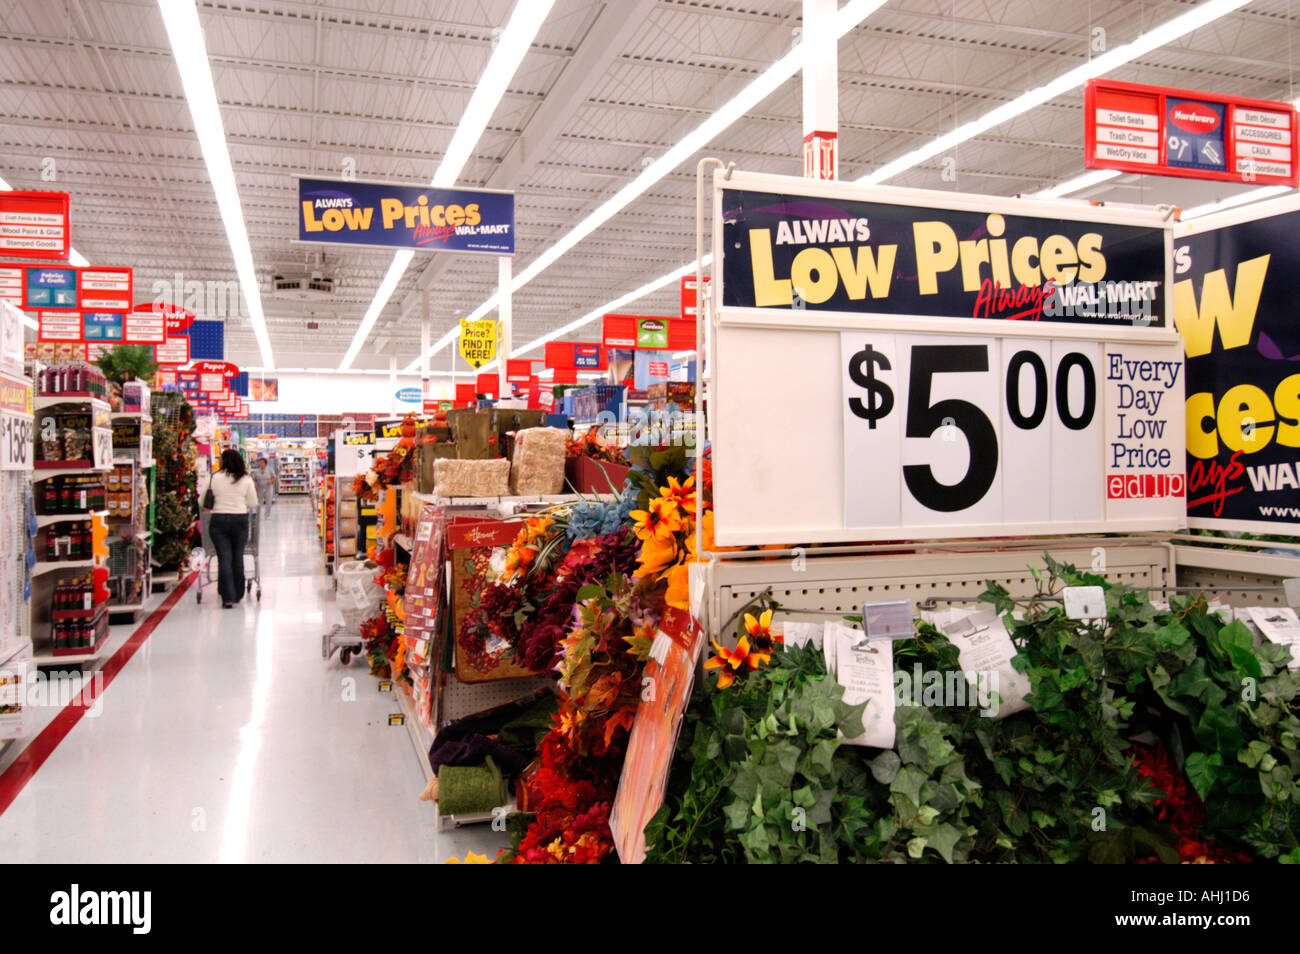 Always Low Prices sign Wal Mart supermarket Wal Mart New Jersey, USA Stock Photo